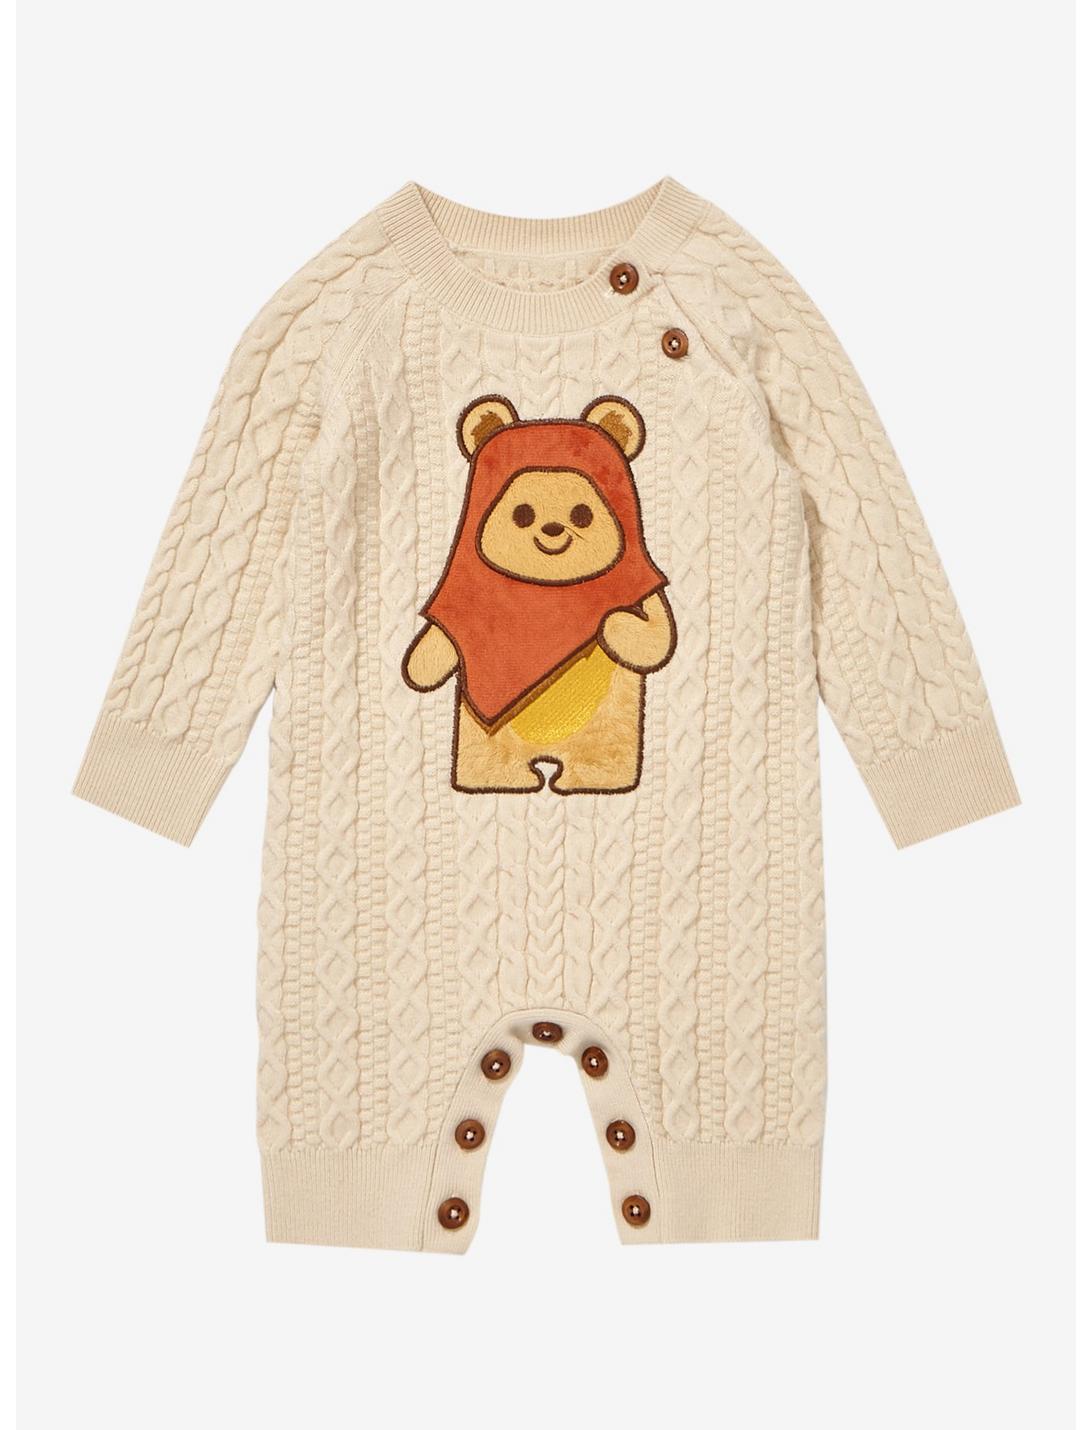 Our Universe Star Wars Ewok Knit Infant One-Piece - BoxLunch Exclusive, NATURAL, hi-res